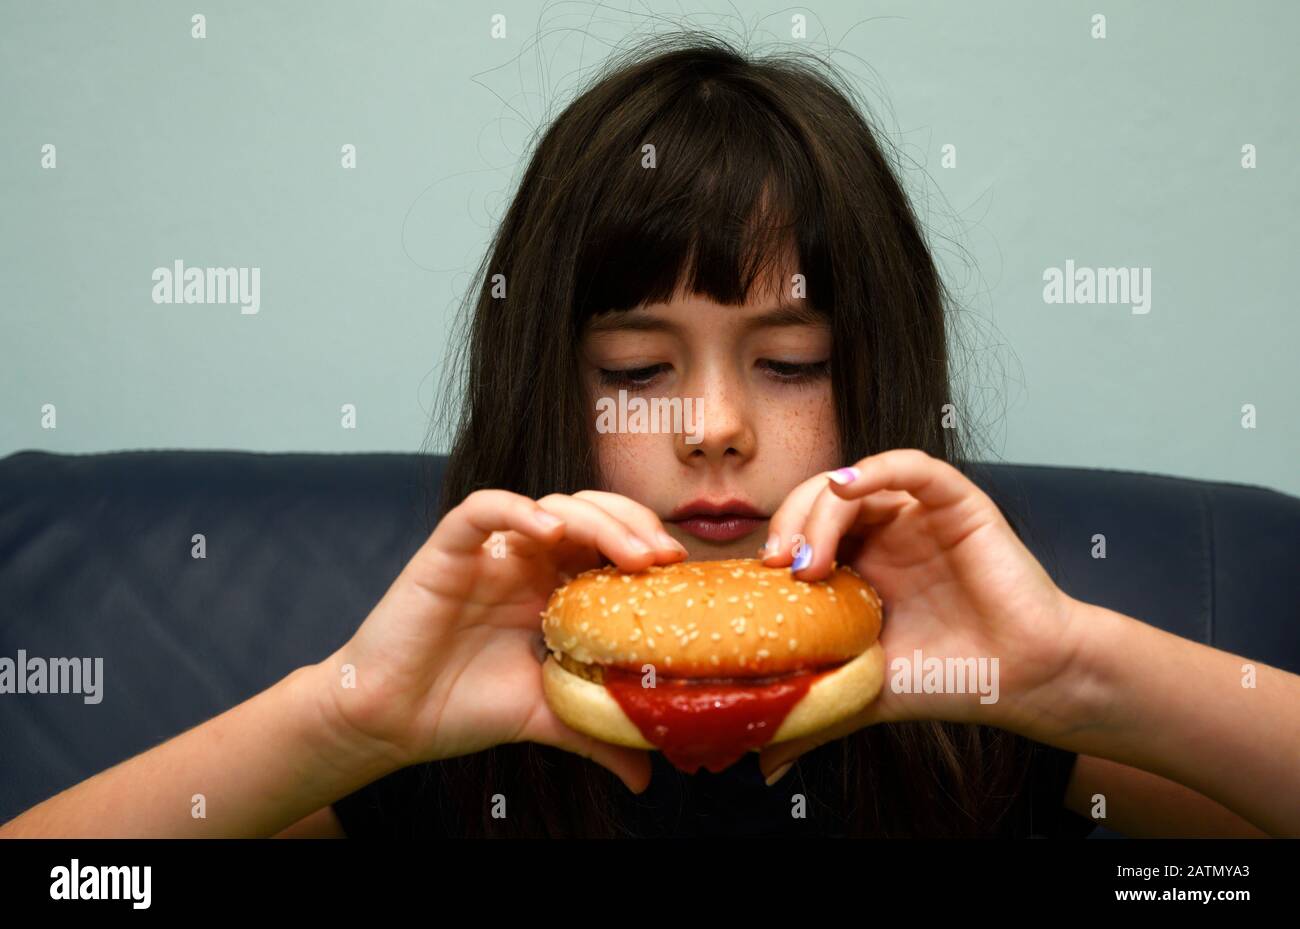 6-year old girl eating a chicken burger Stock Photo